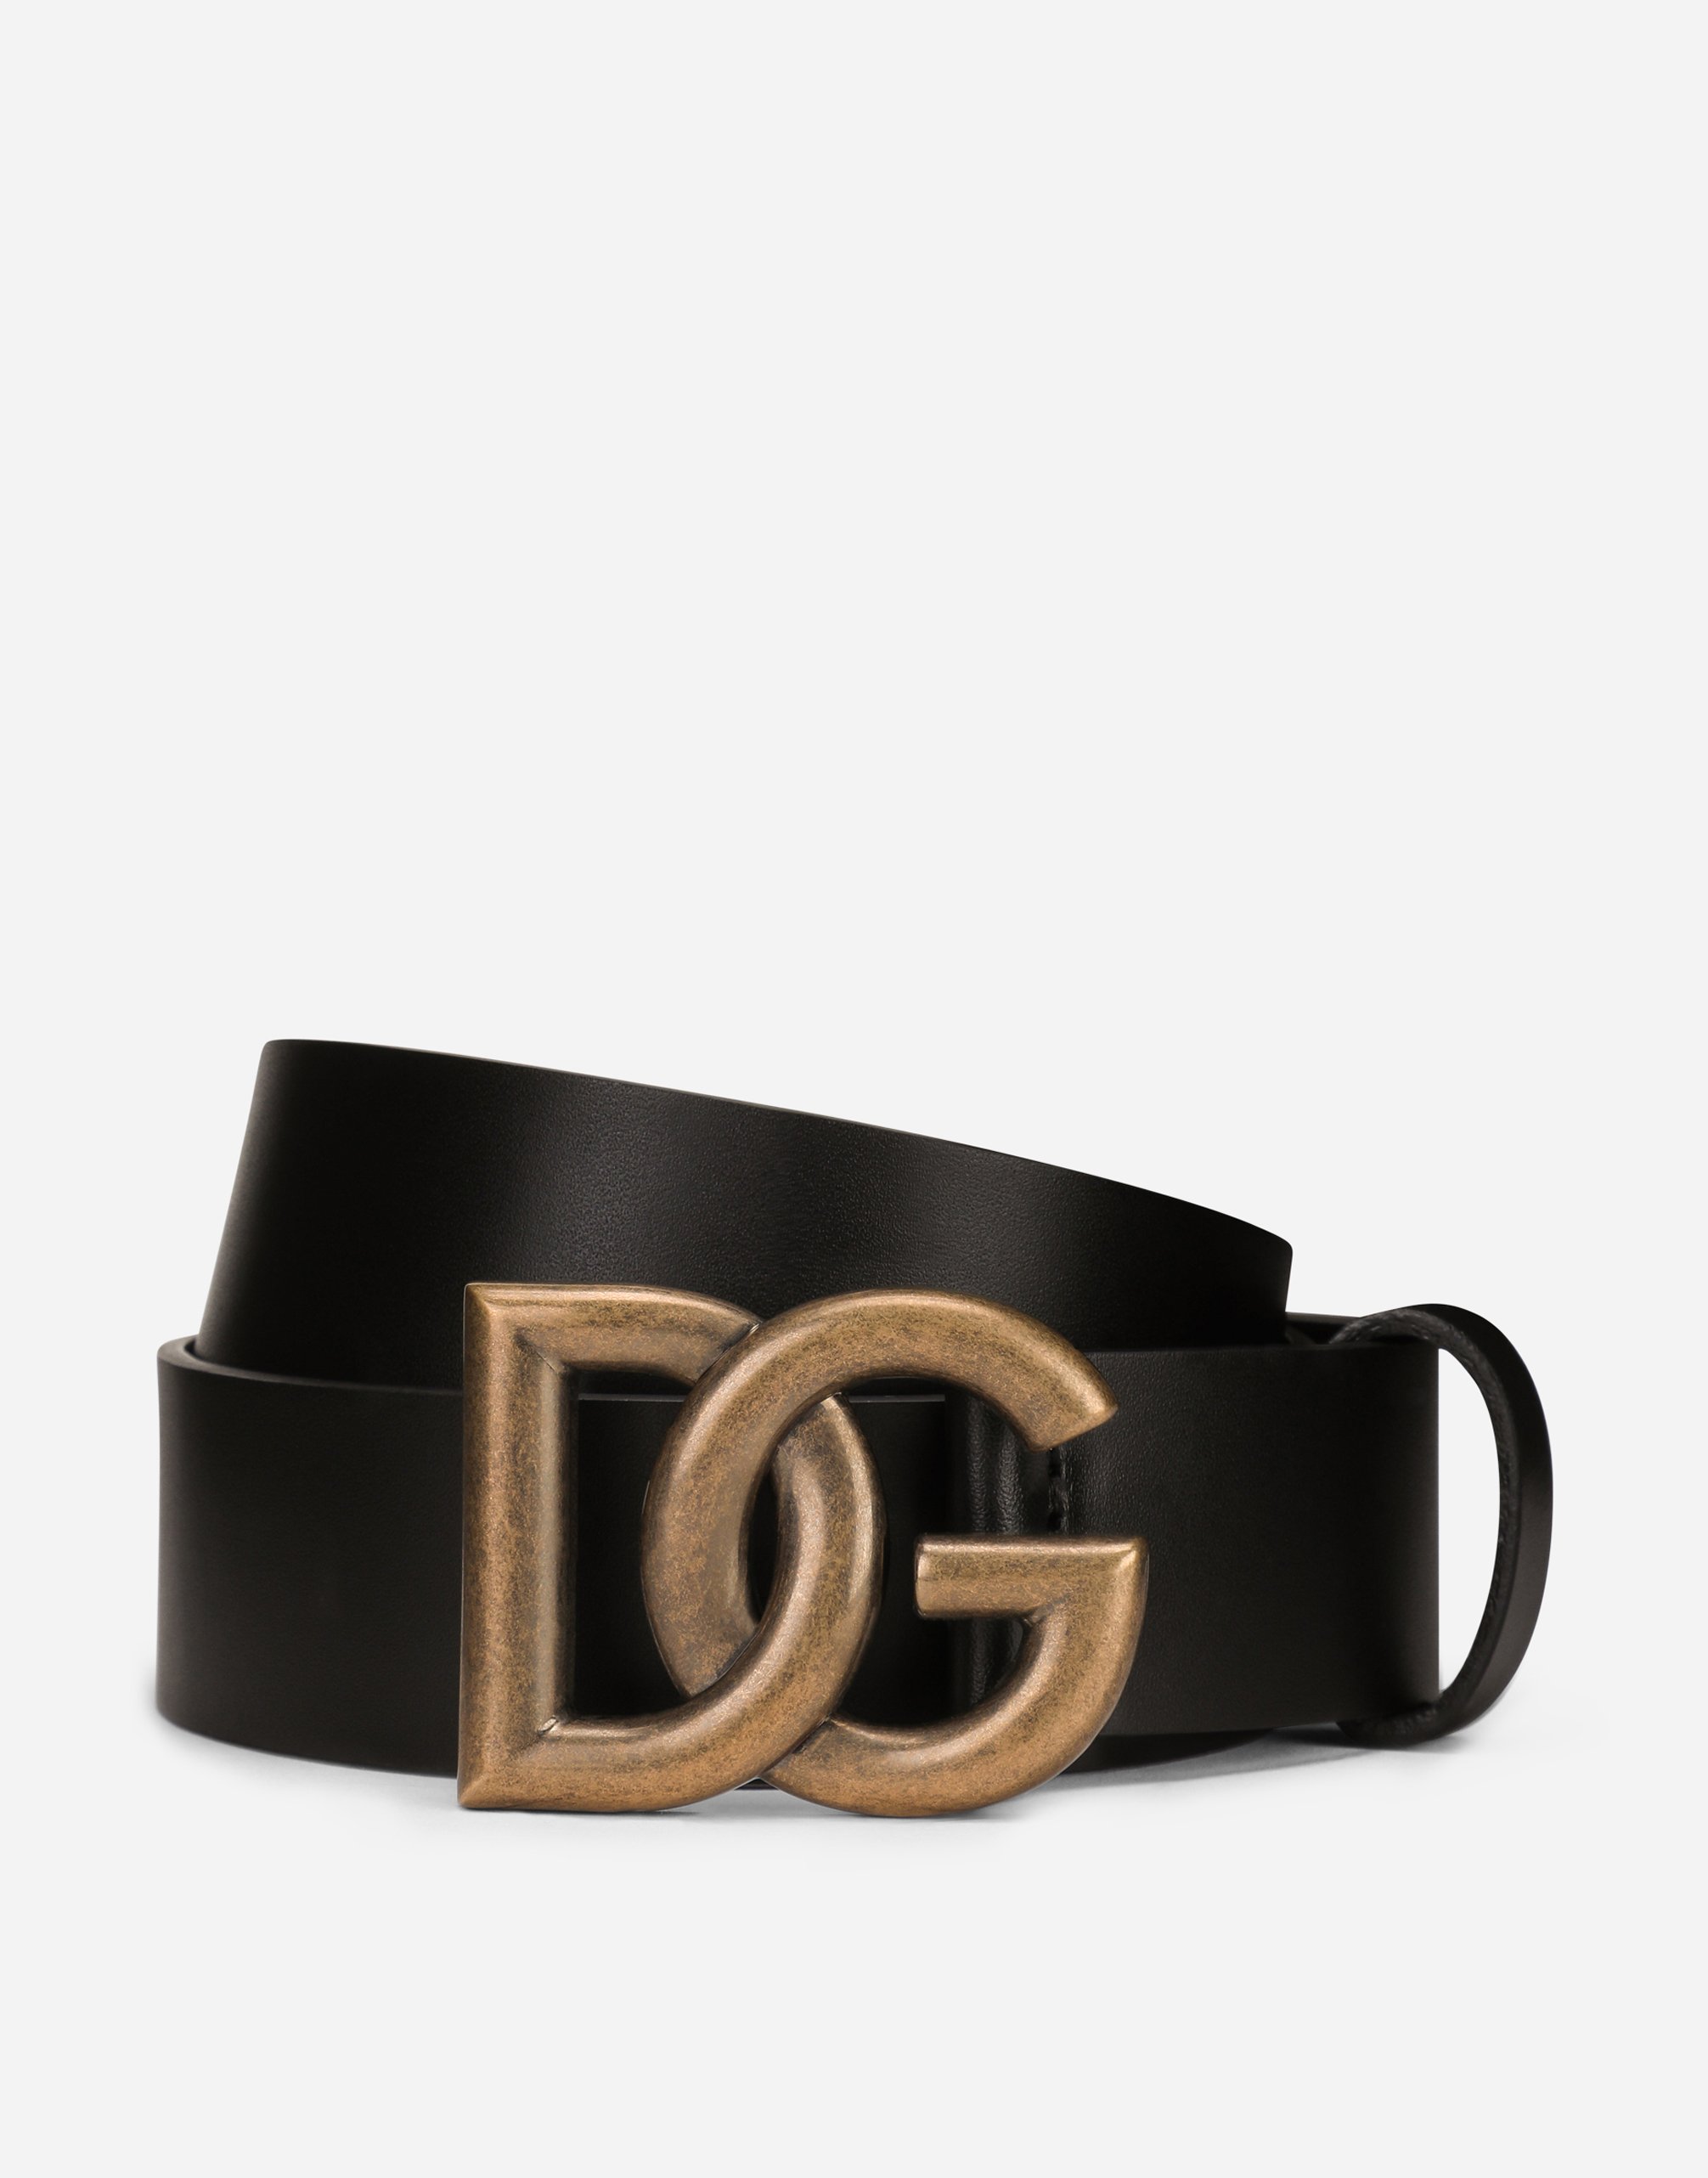 Lux leather belt with crossover DG logo buckle in Black